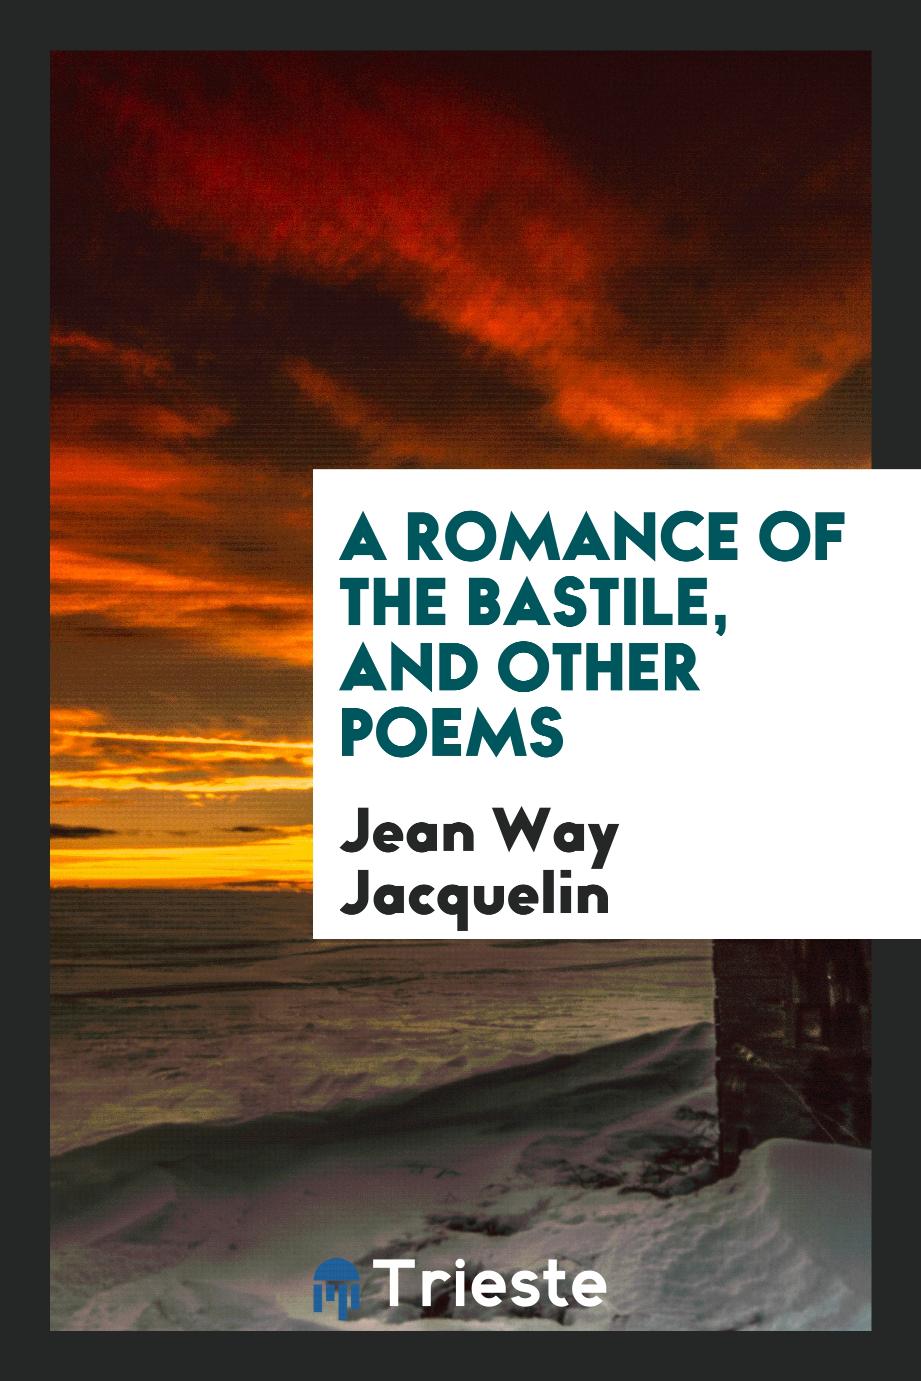 A Romance of the Bastile, and Other Poems